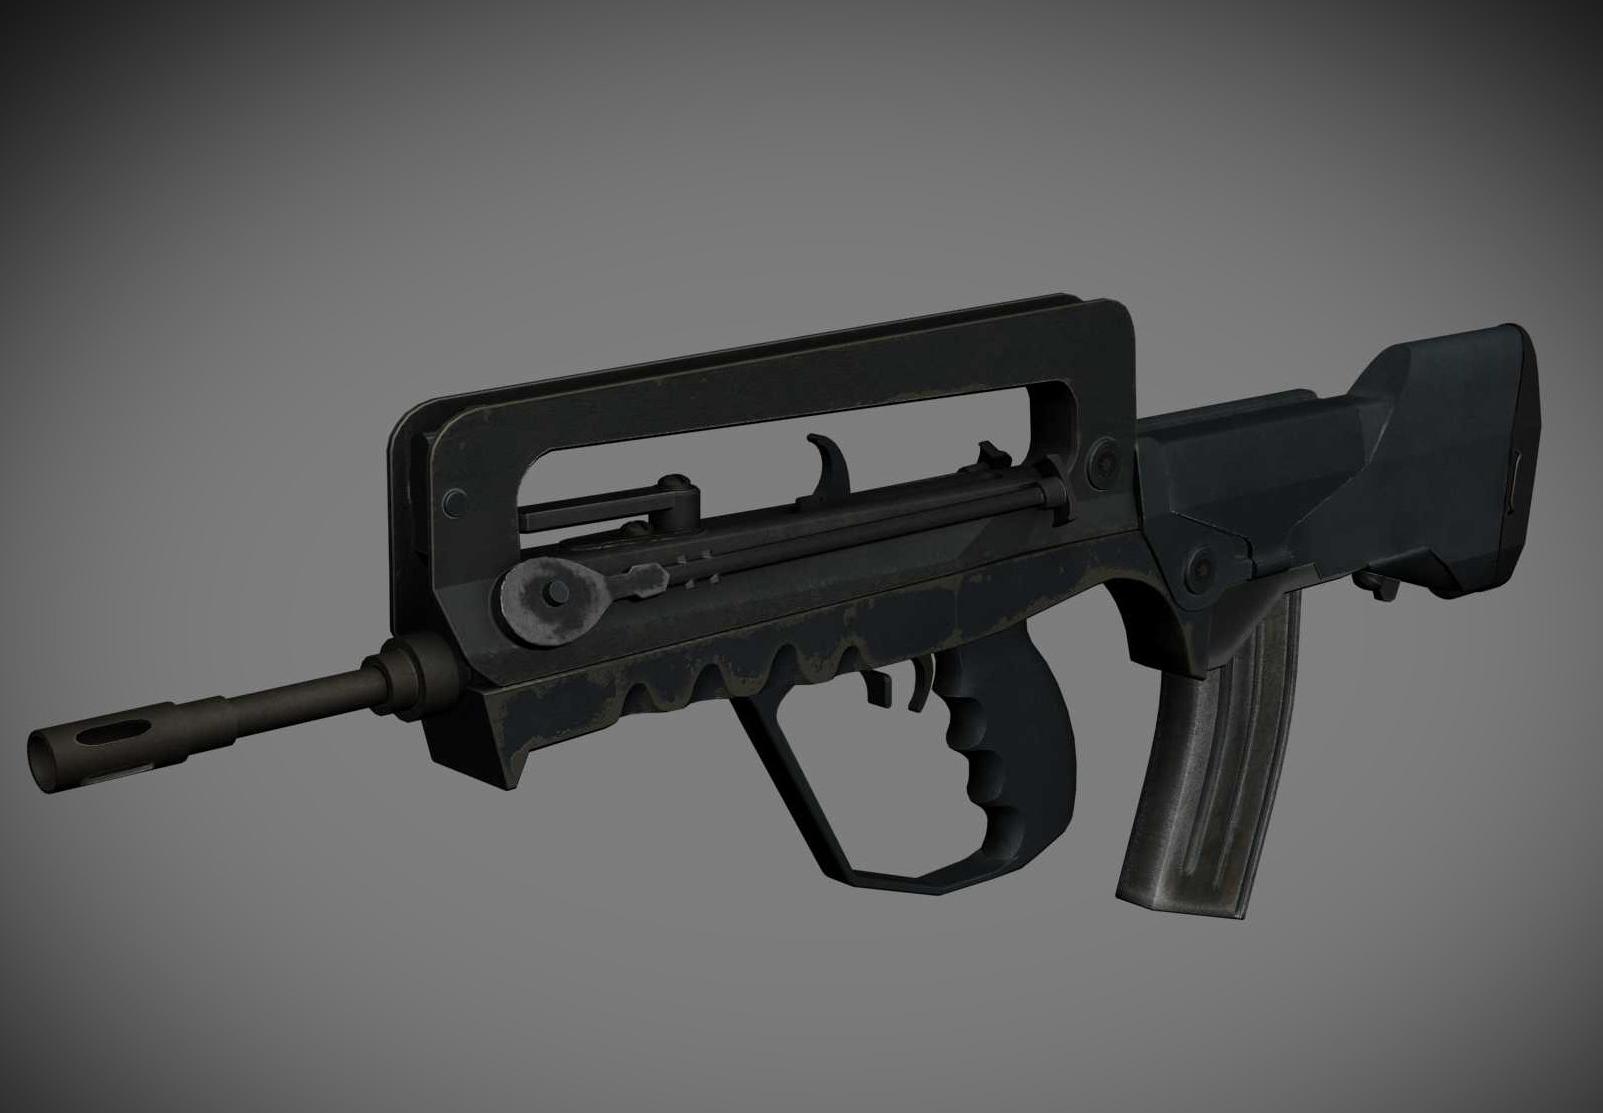 FAMAS Colony cs go skin download the last version for apple